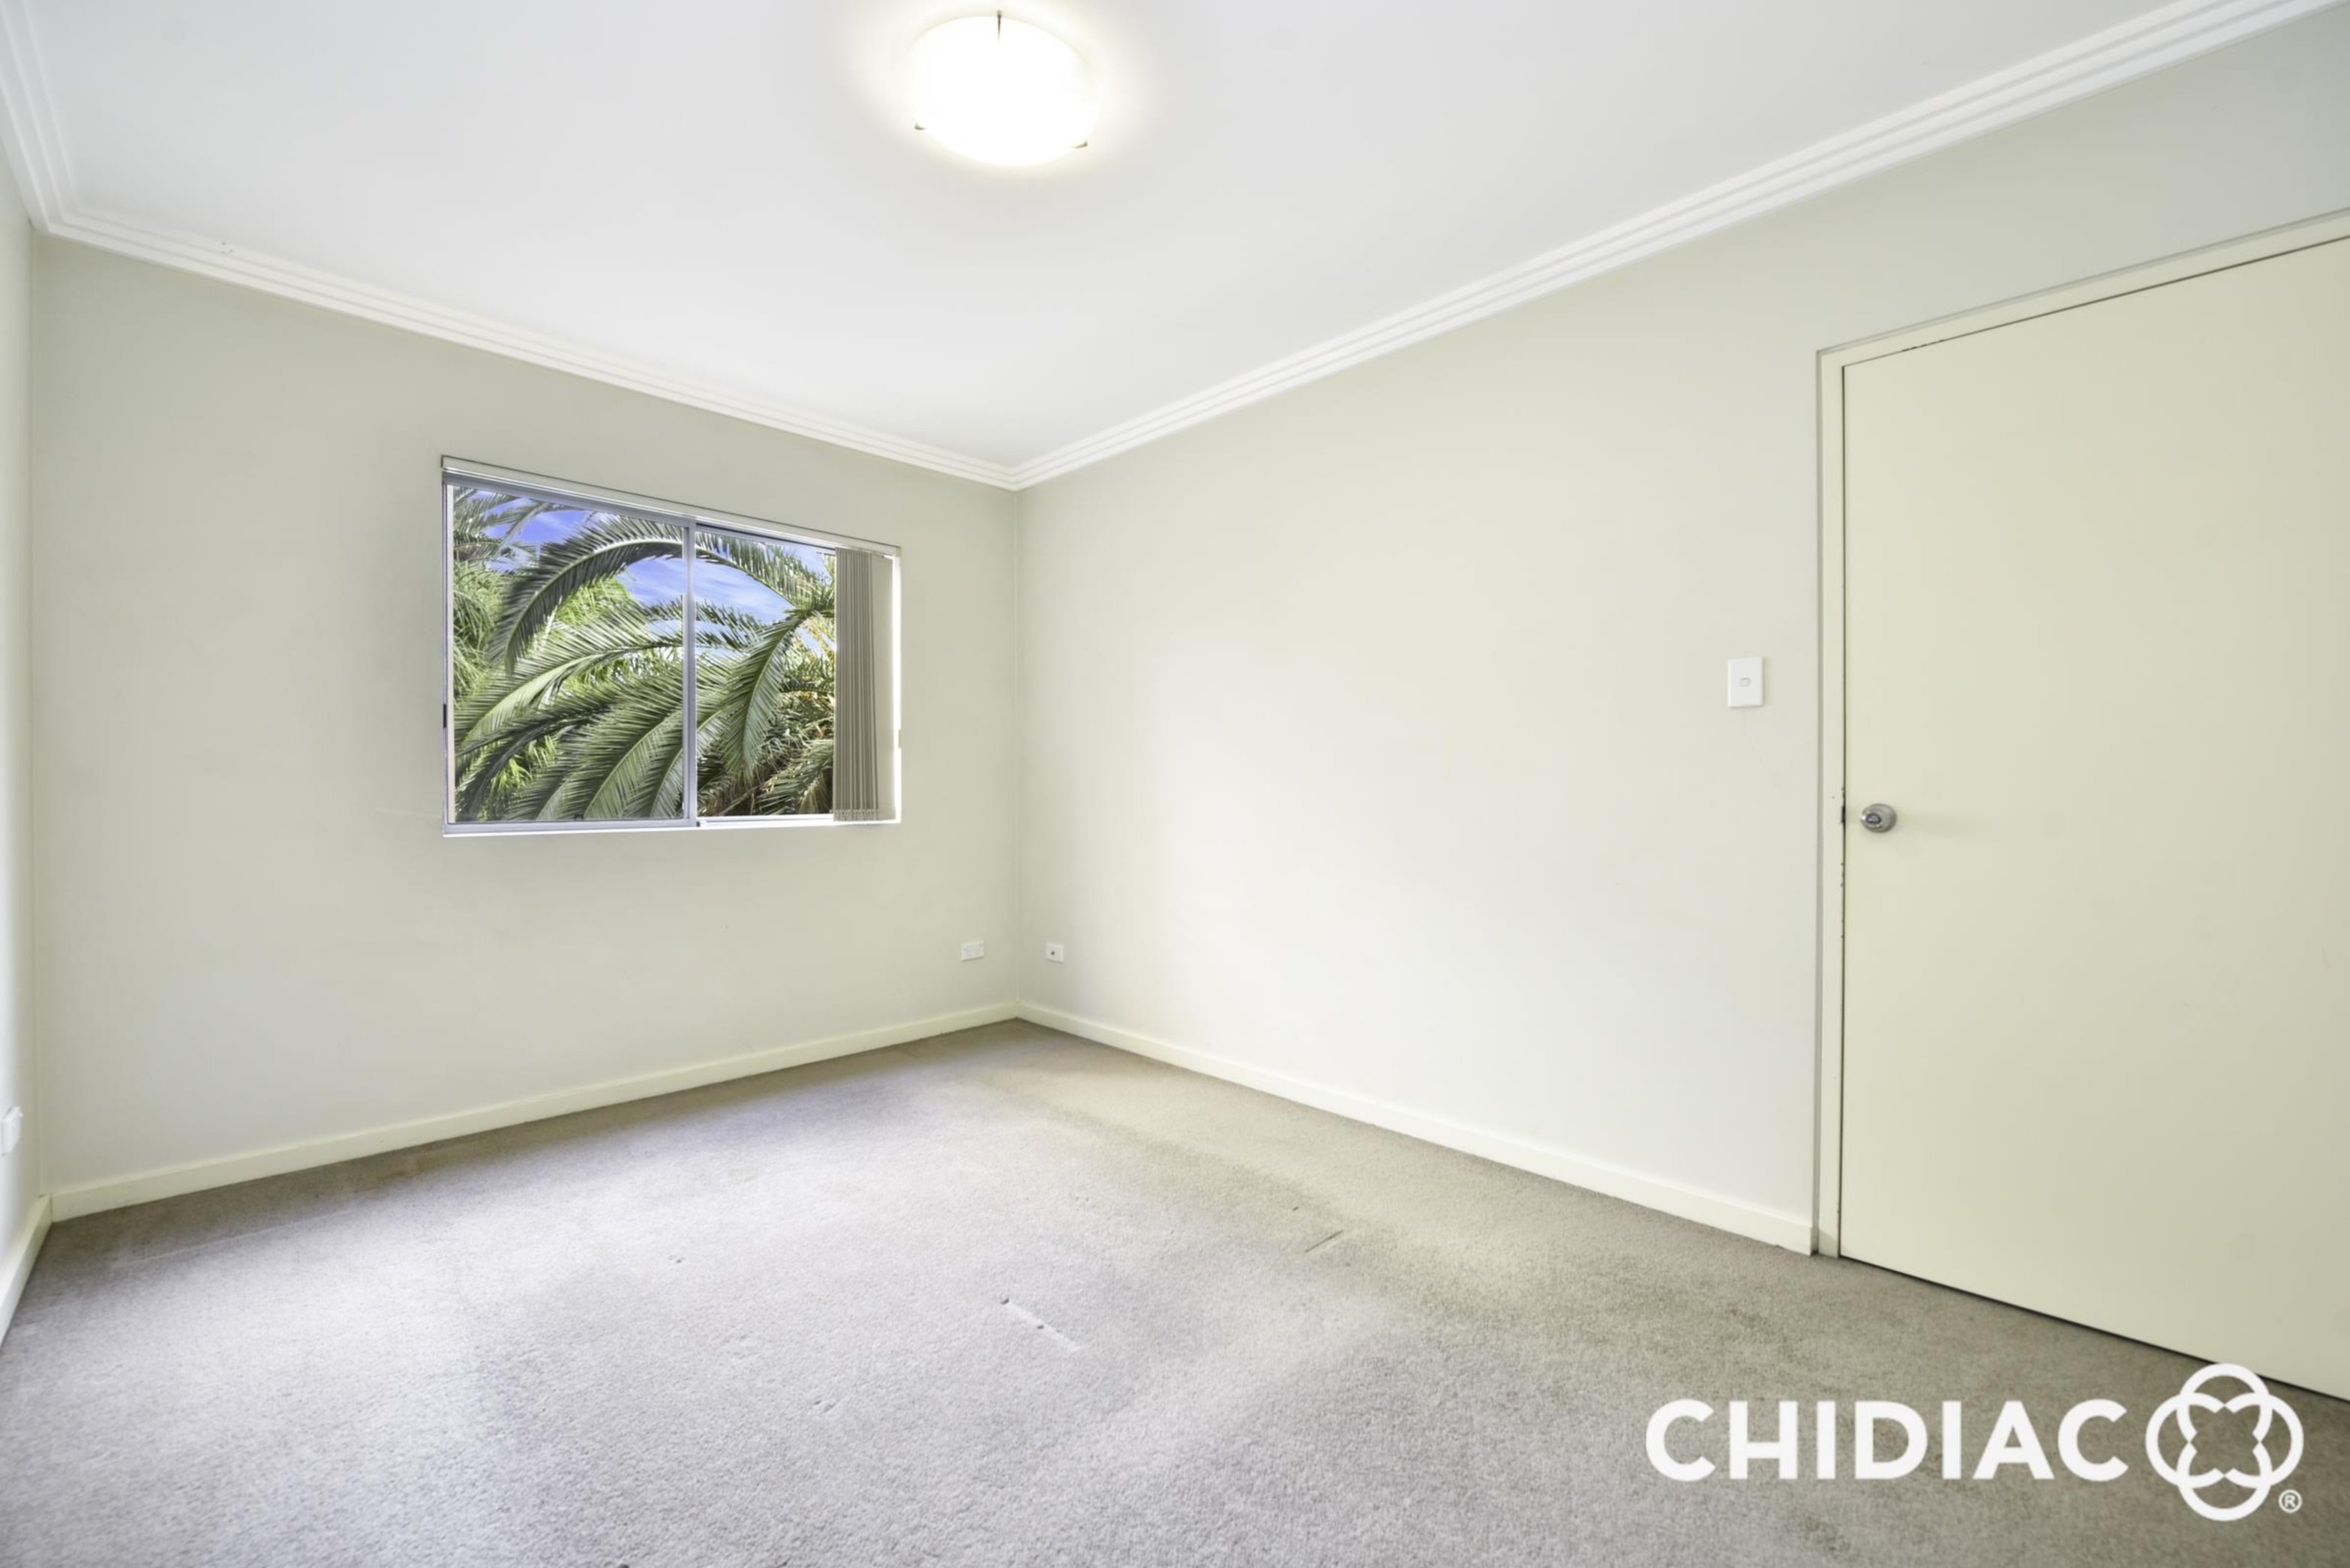 20/342A Marrickville Road, Marrickville Leased by Chidiac Realty - image 4